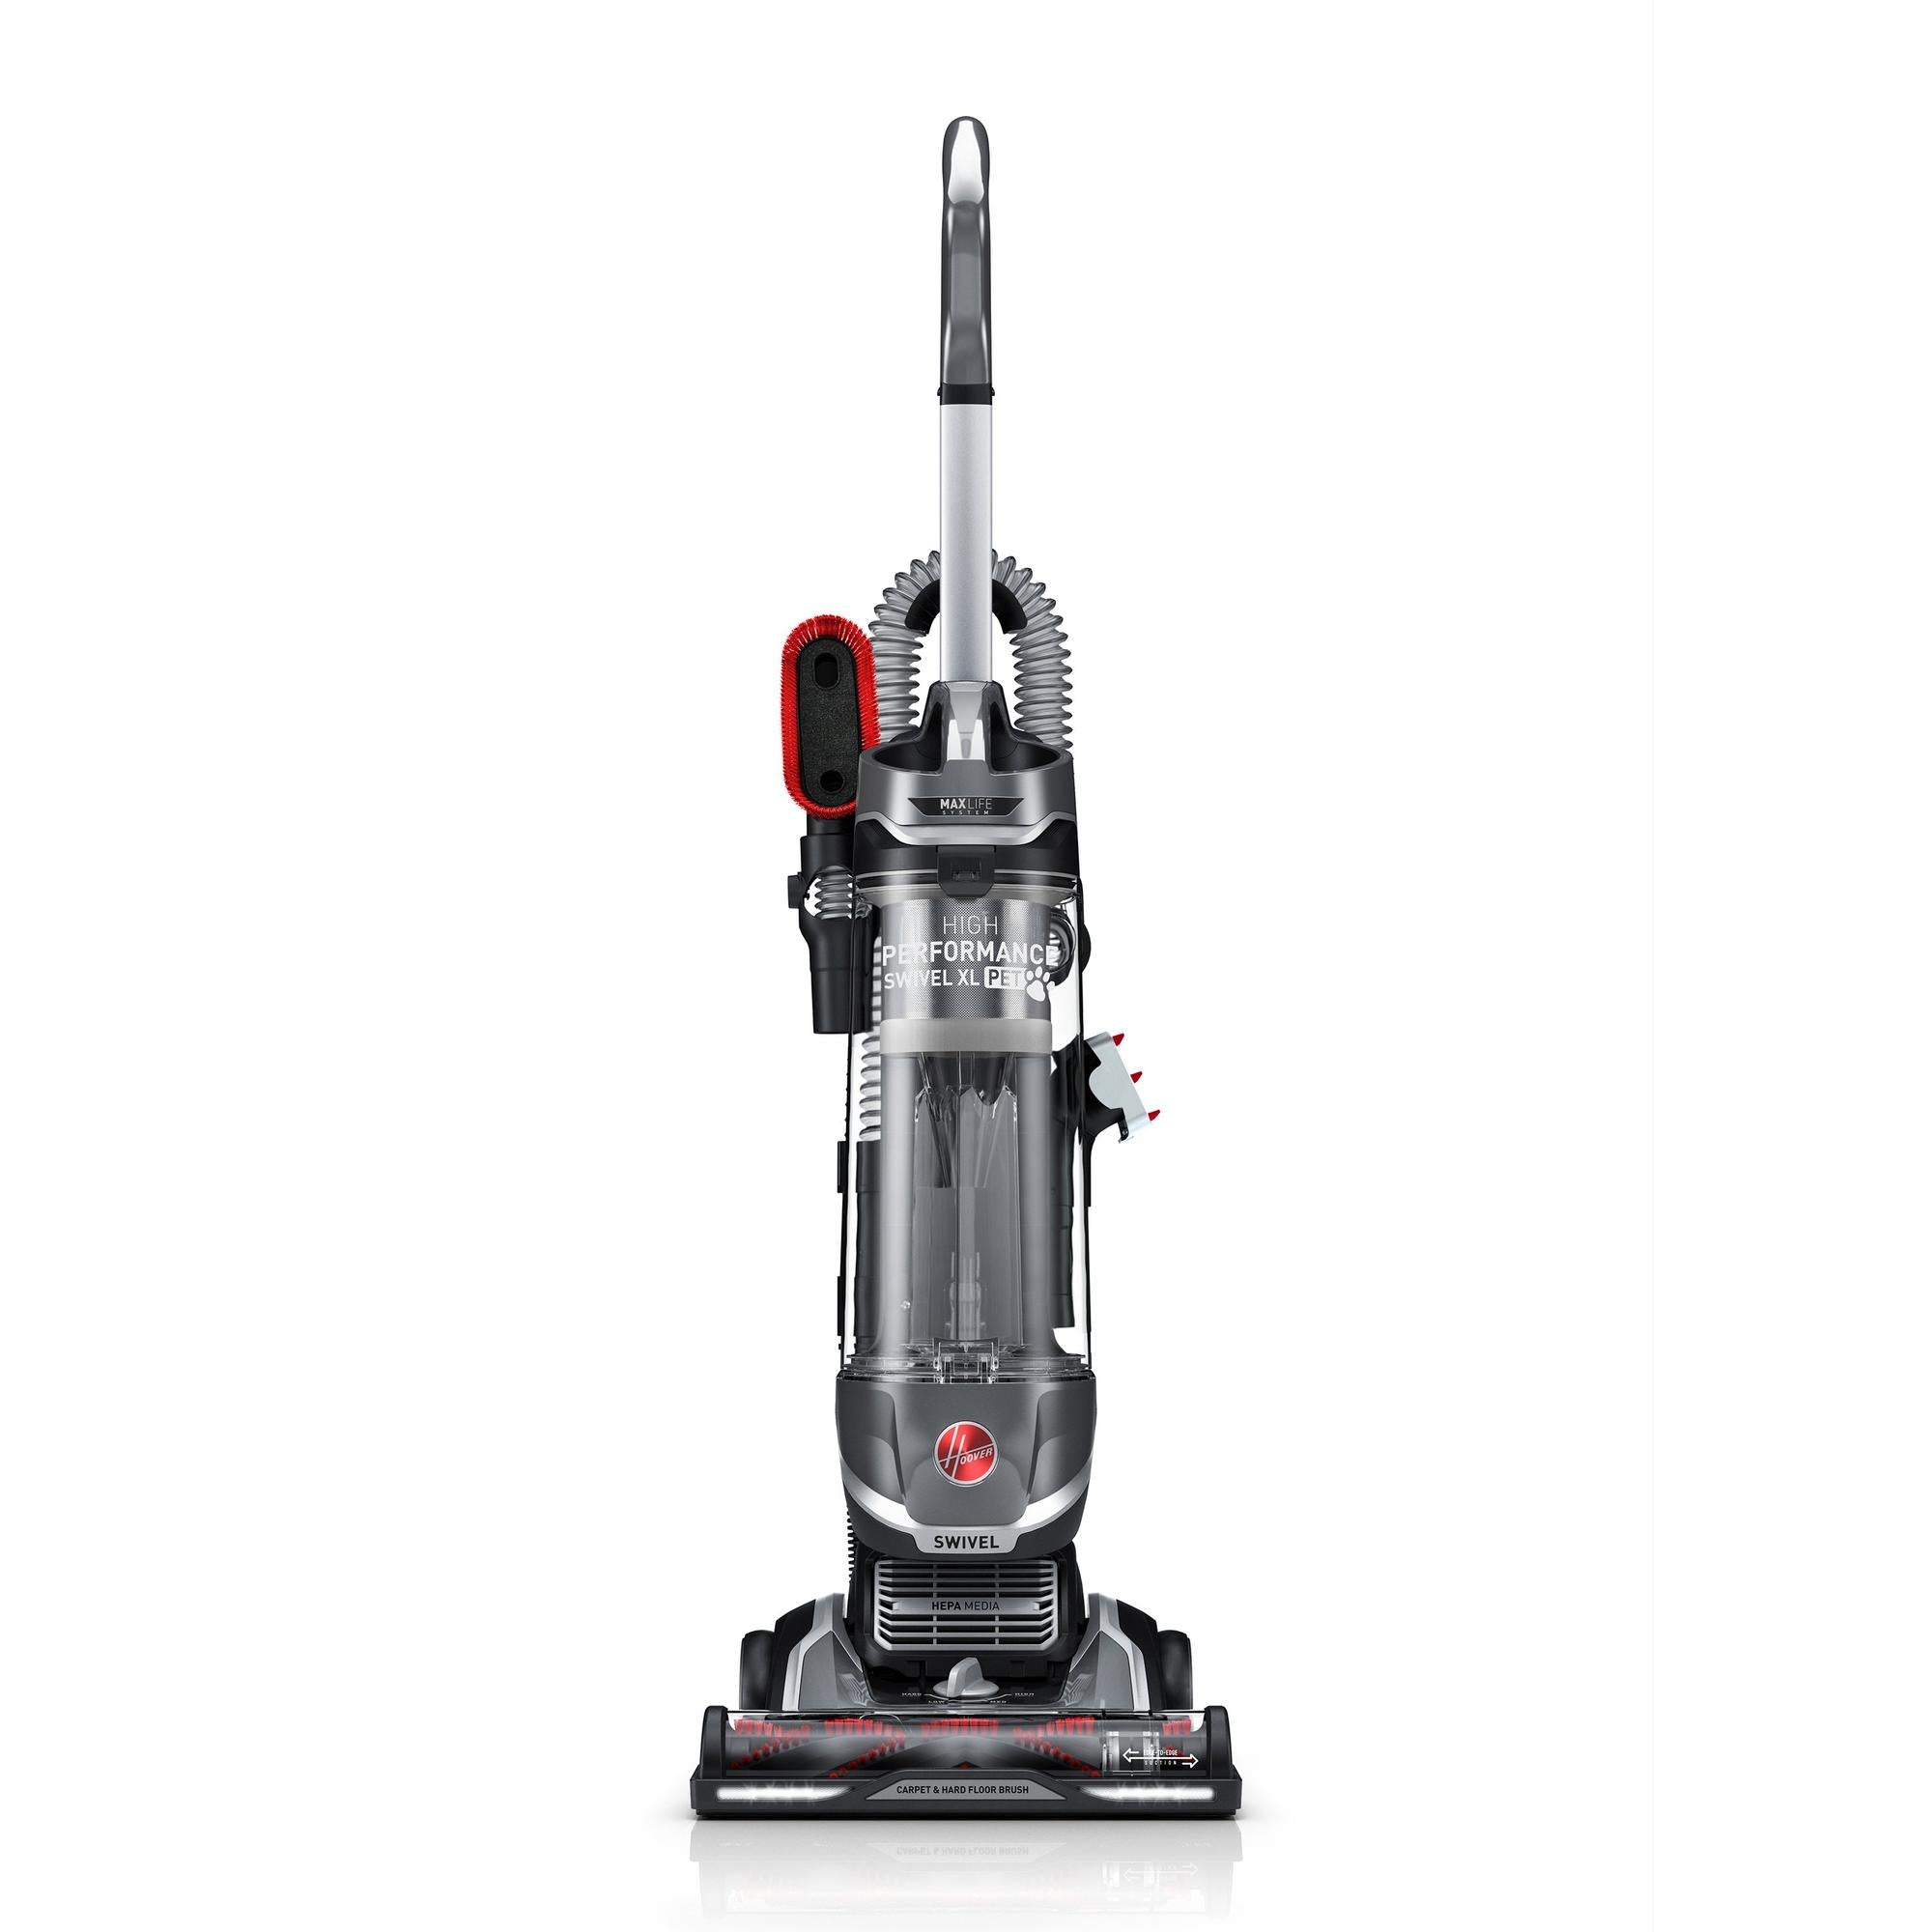 Maximize Home Cleaning Efficiency with Versatile Vacuum Cleaner